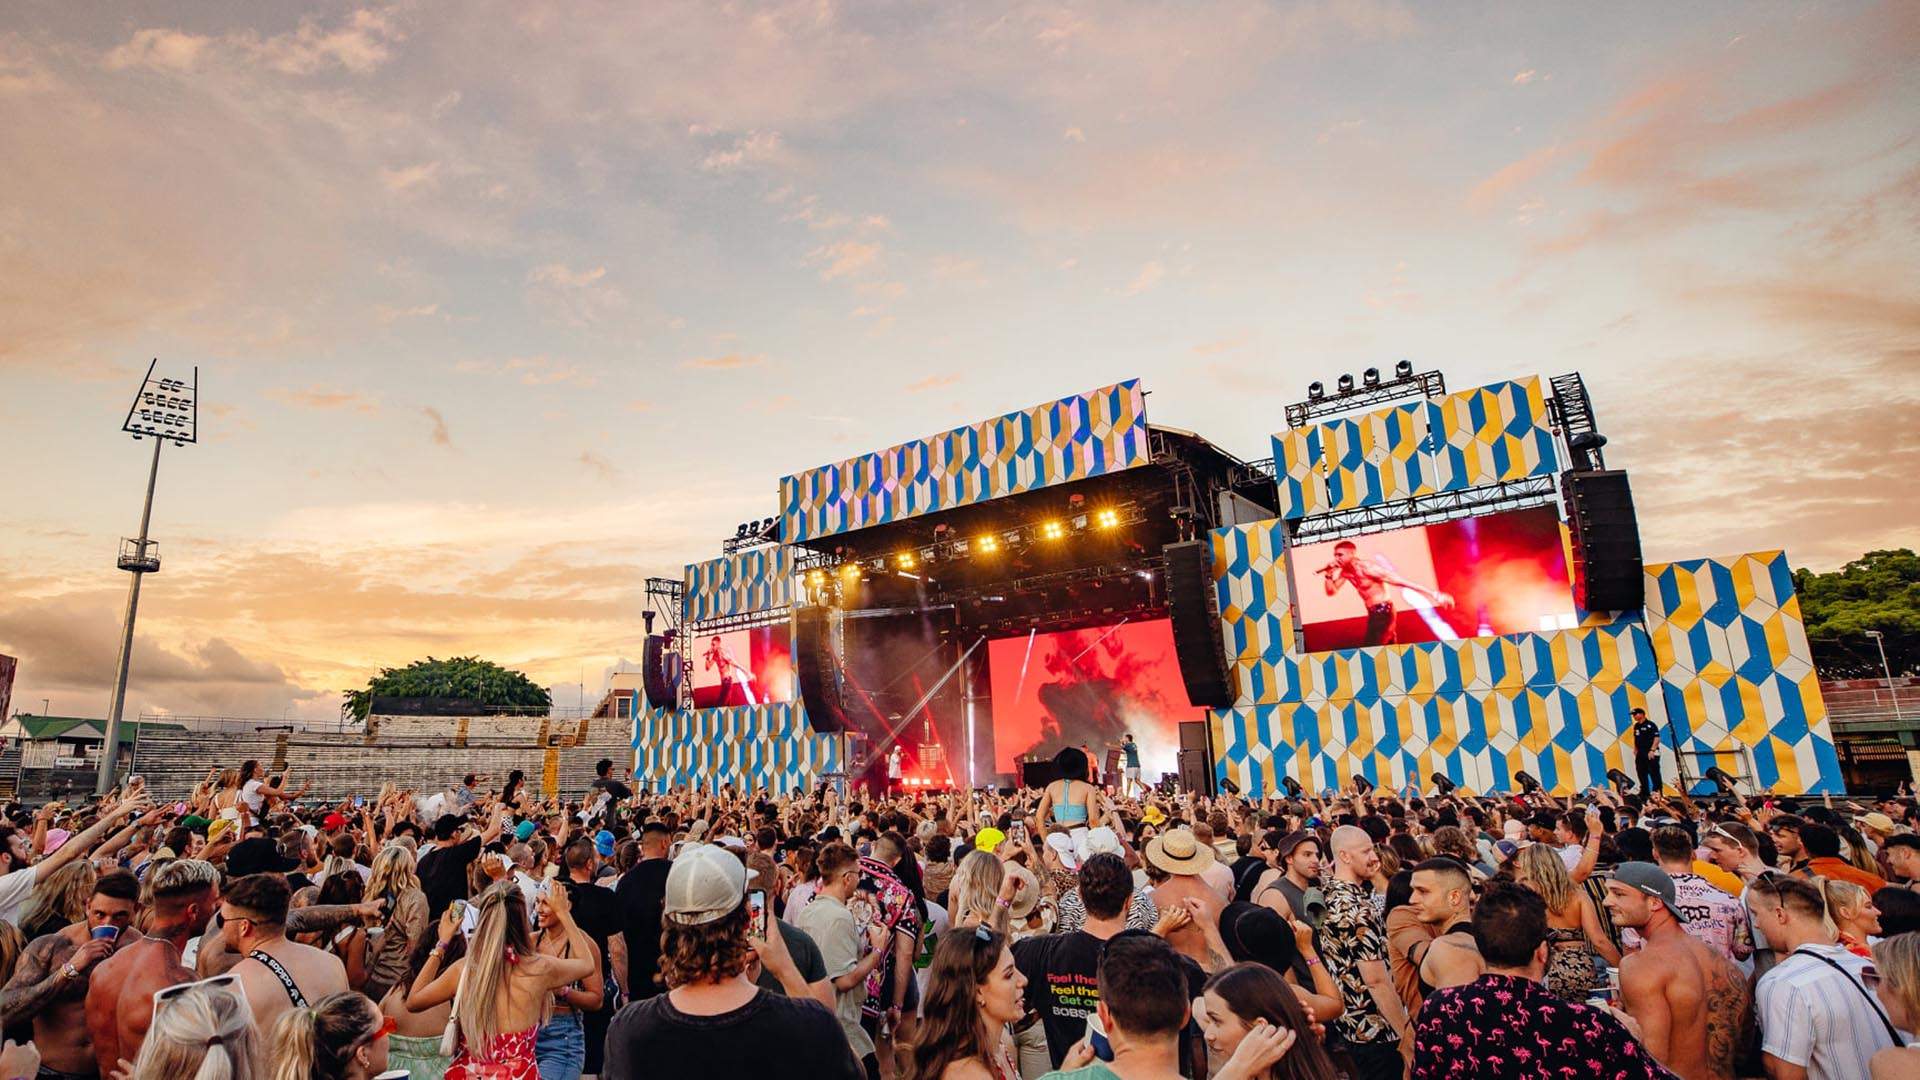 Wildlands' 2023–24 Lineup Is Here with RÜFÜS DU SOL, Central Cee, Peggy Gou and A$AP Ferg